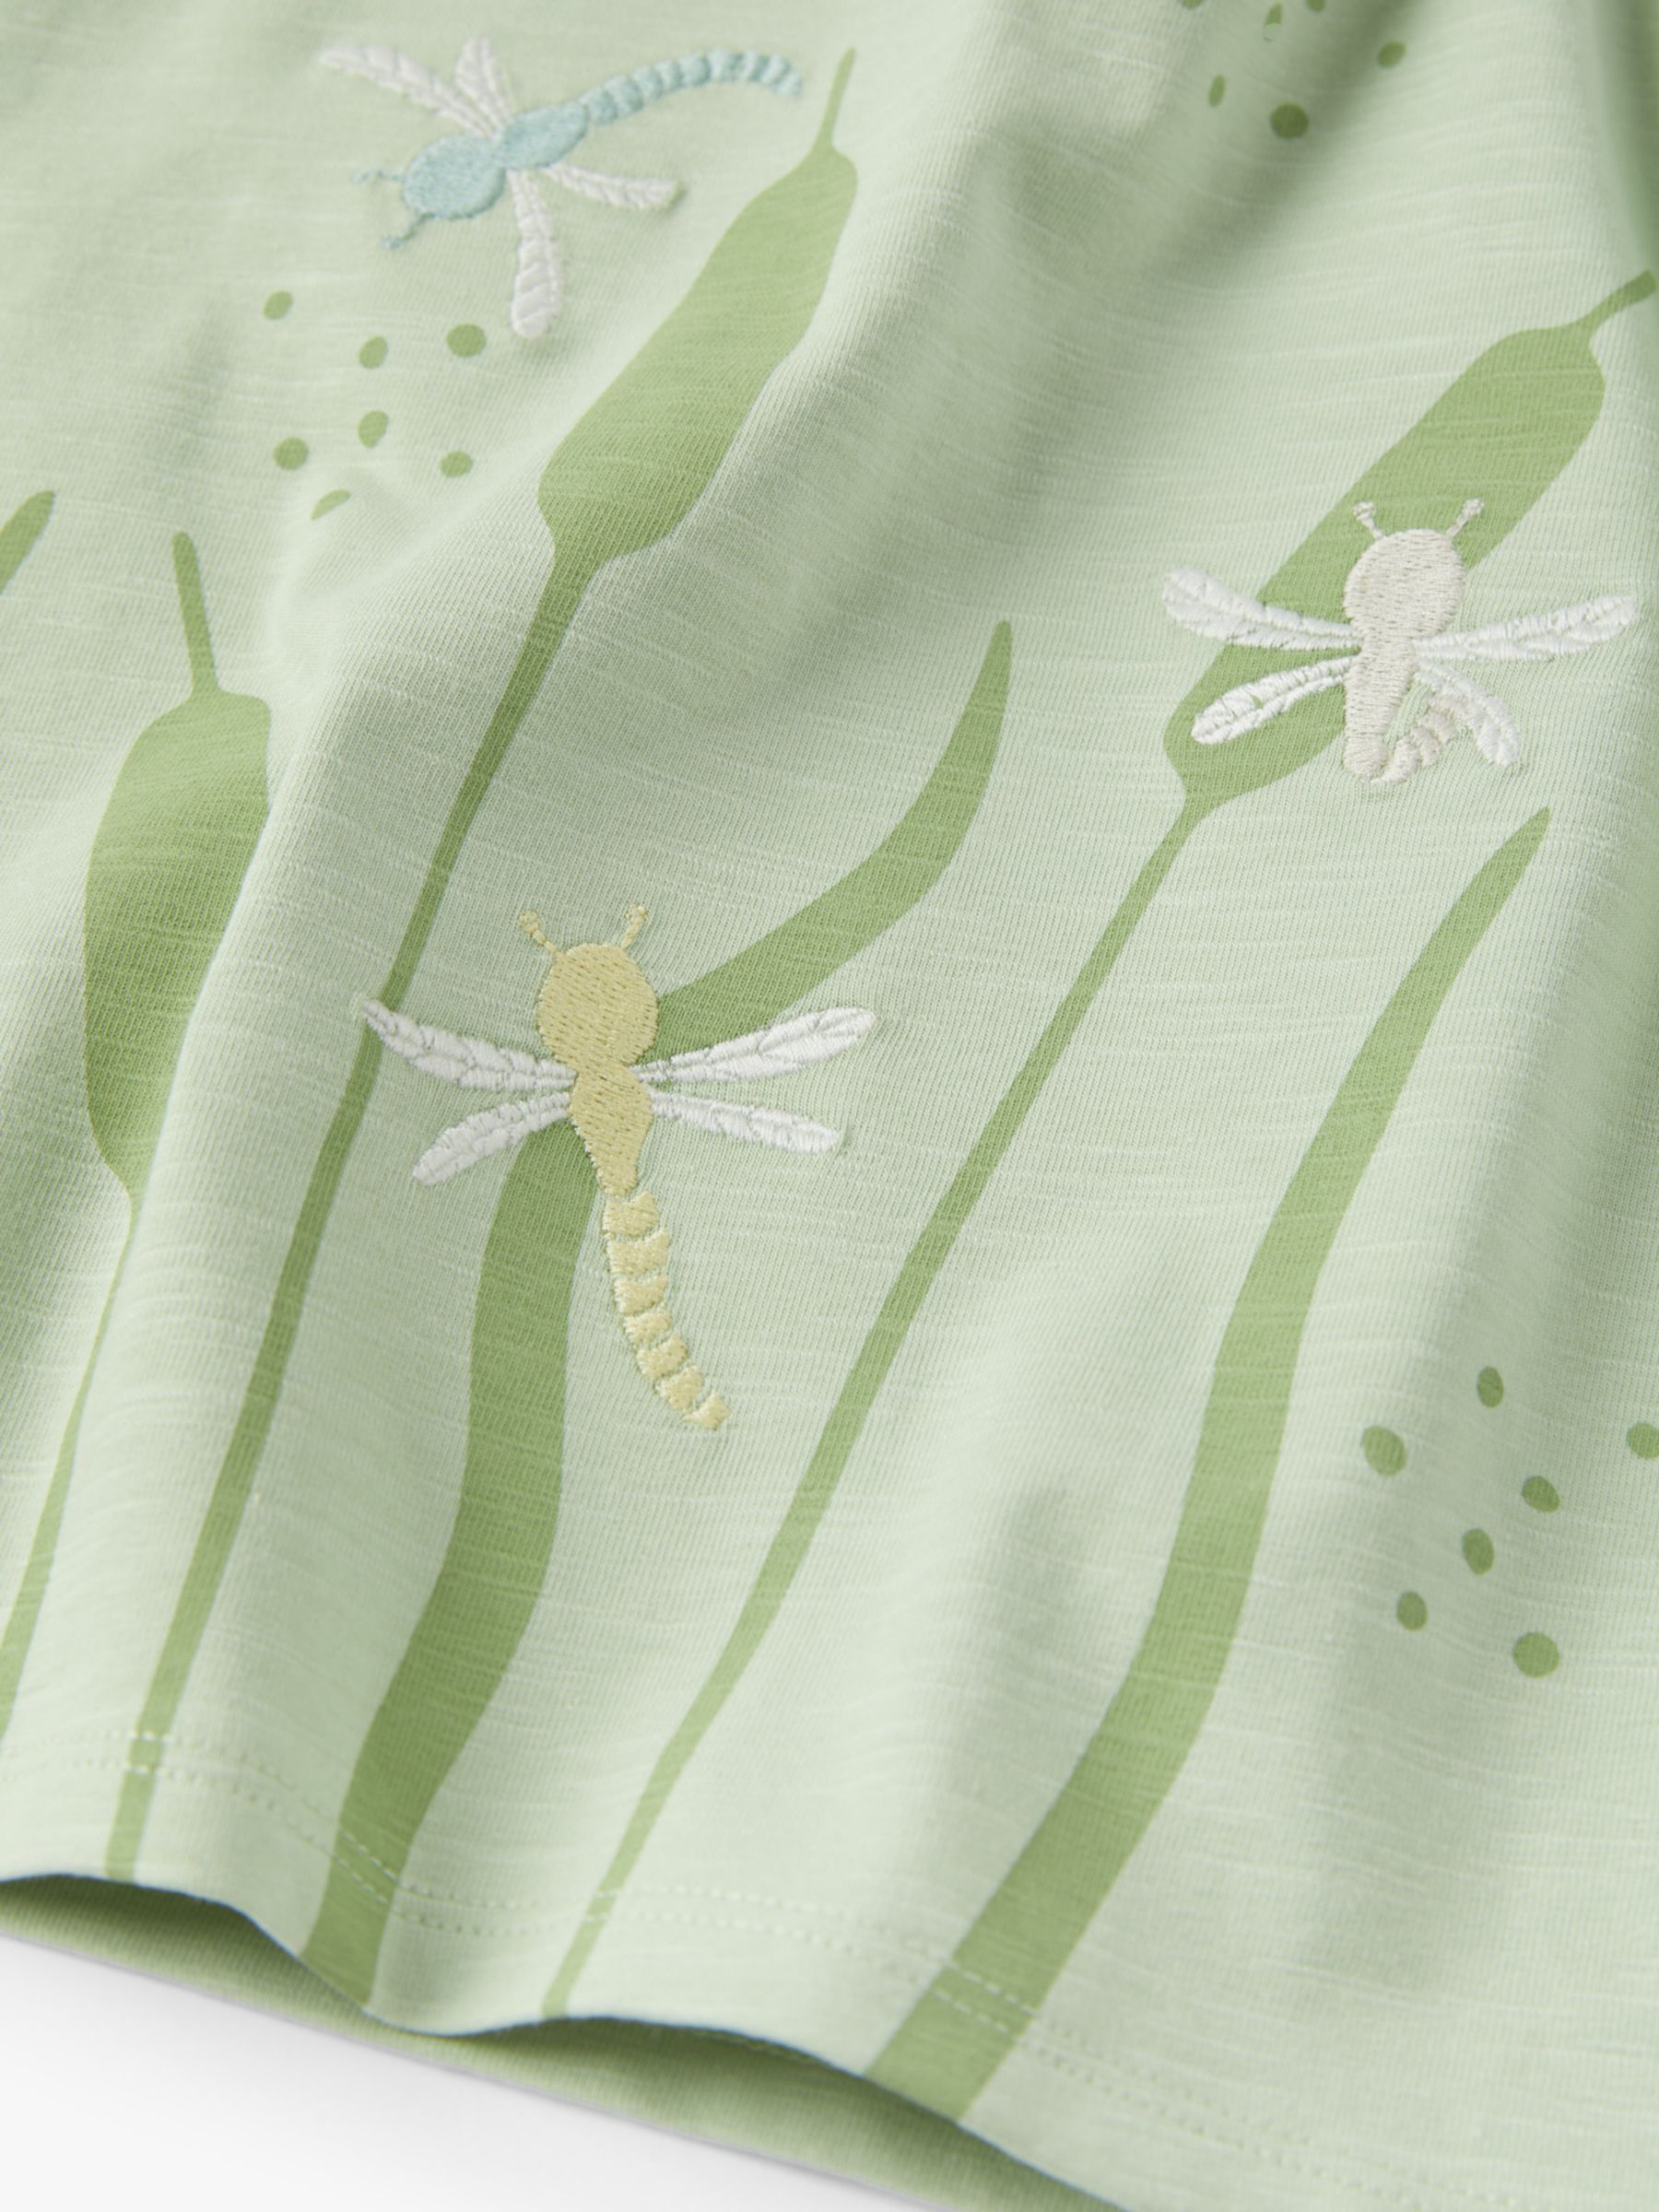 Polarn O. Pyret Baby Organic Cotton Blend Dragonfly Embroidered T-Shirt, Green, 2-4 months